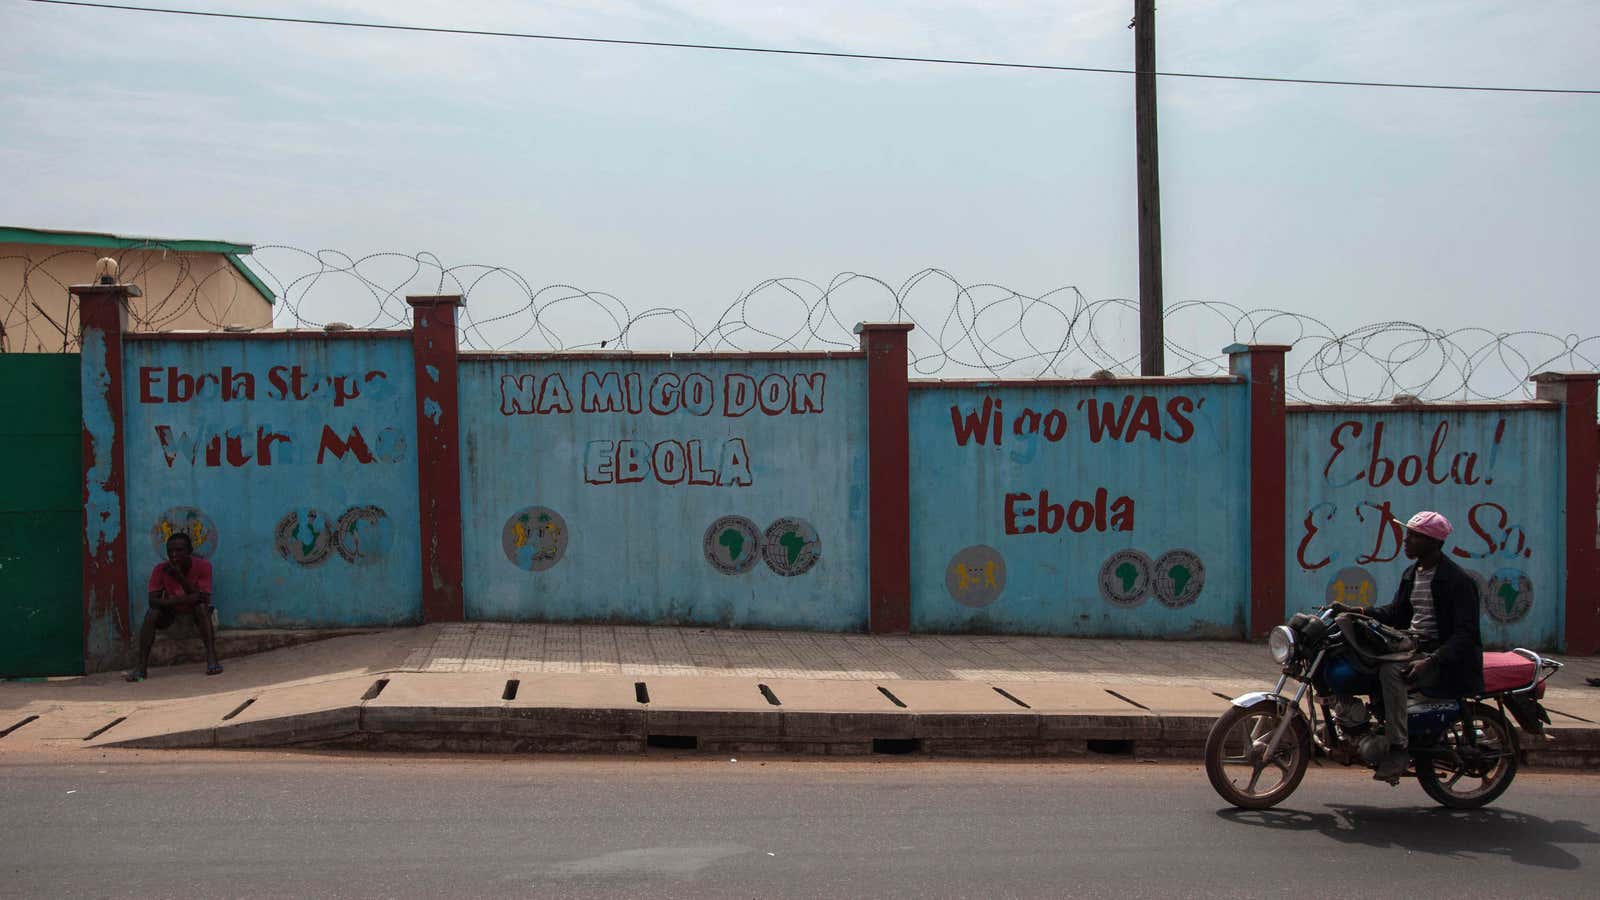 Men on motorbikes pass a wall with ‘We go wash Ebola’ in Freetown, Sierra Leone.